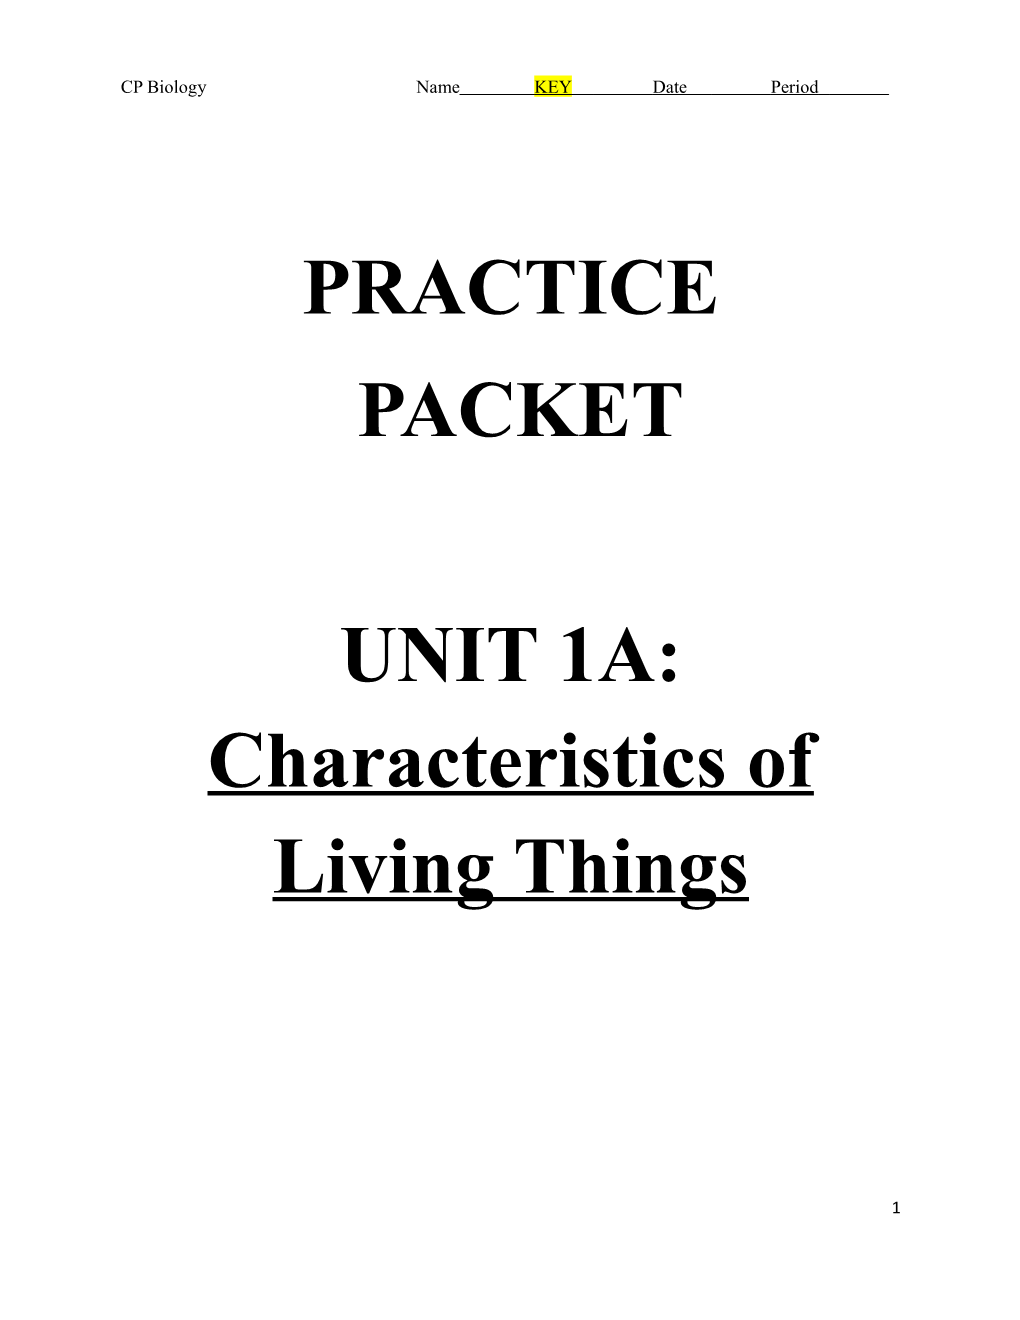 UNIT 1A: Characteristics of Living Things